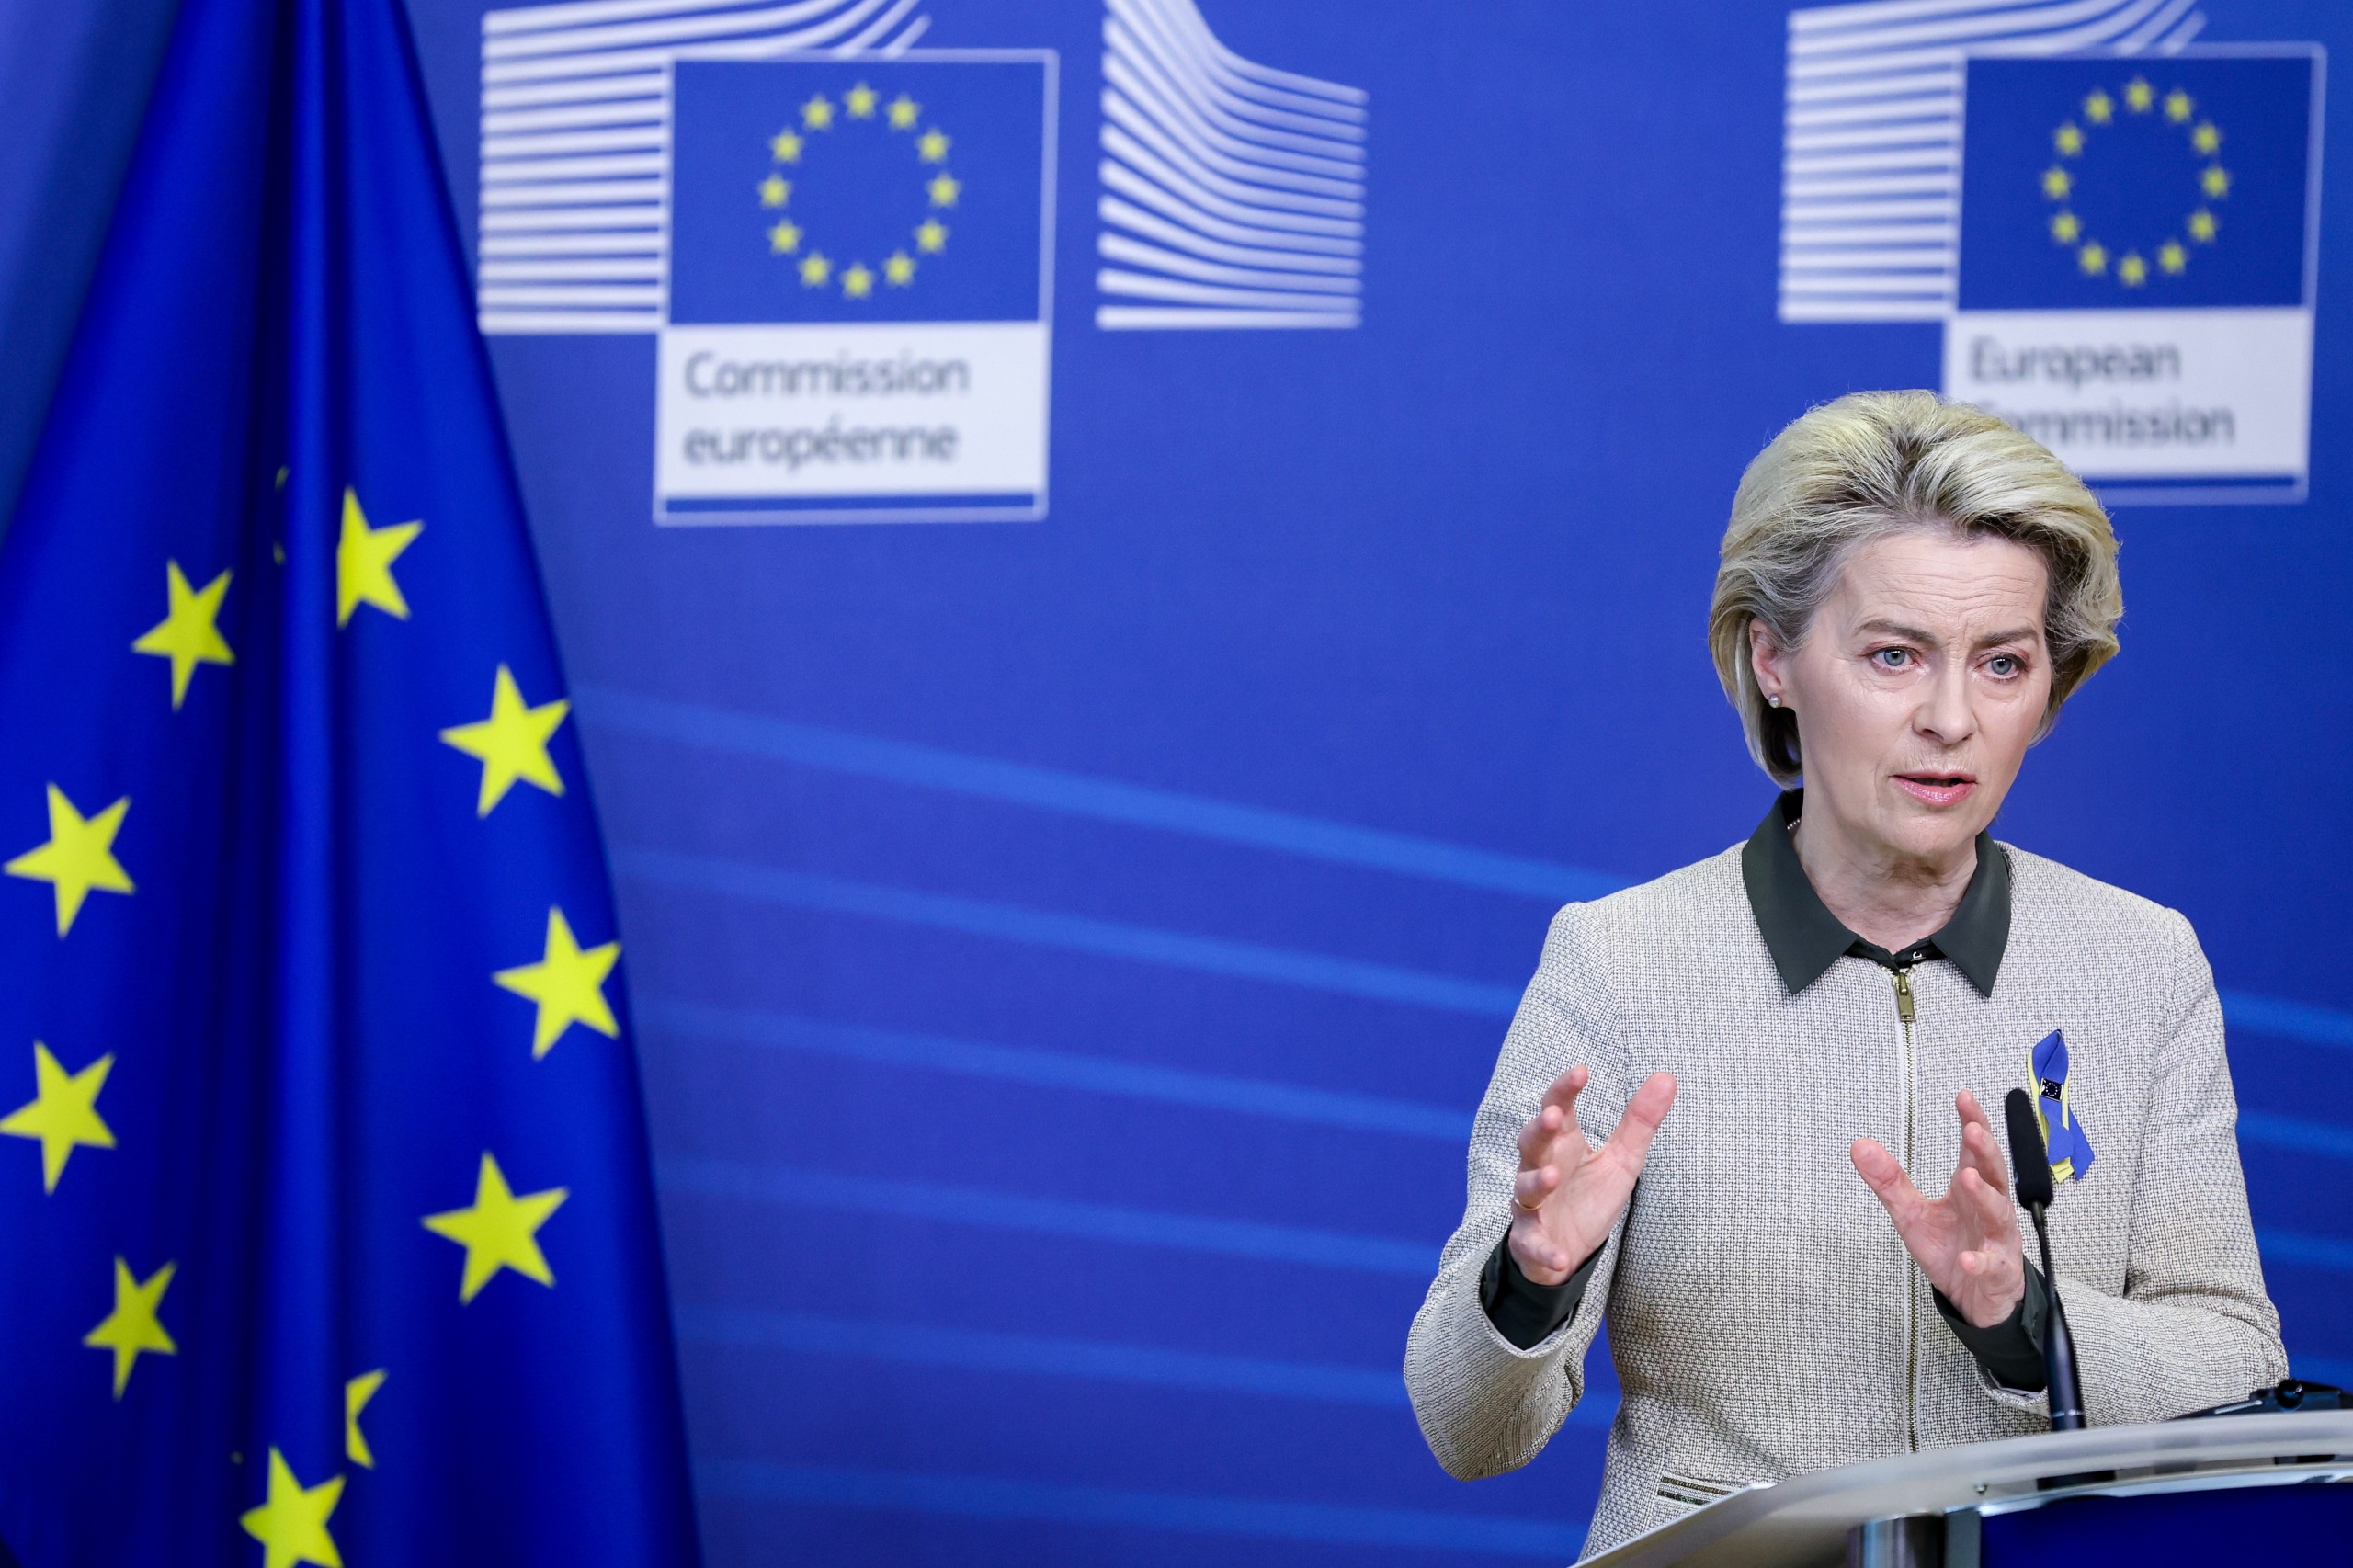 epa09807070 President of the European Commission Ursula von der Leyen delivers a statement next to Italy's Prime Minister prior to a meeting at the Berlaymont Building, headquarters of the European Commission, in Brussels, Belgium, 07 March 2022. Both leaders discussed the new sanction enforcement package EU is working on against Russia.  EPA/KENZO TRIBOUILLARD / POOL